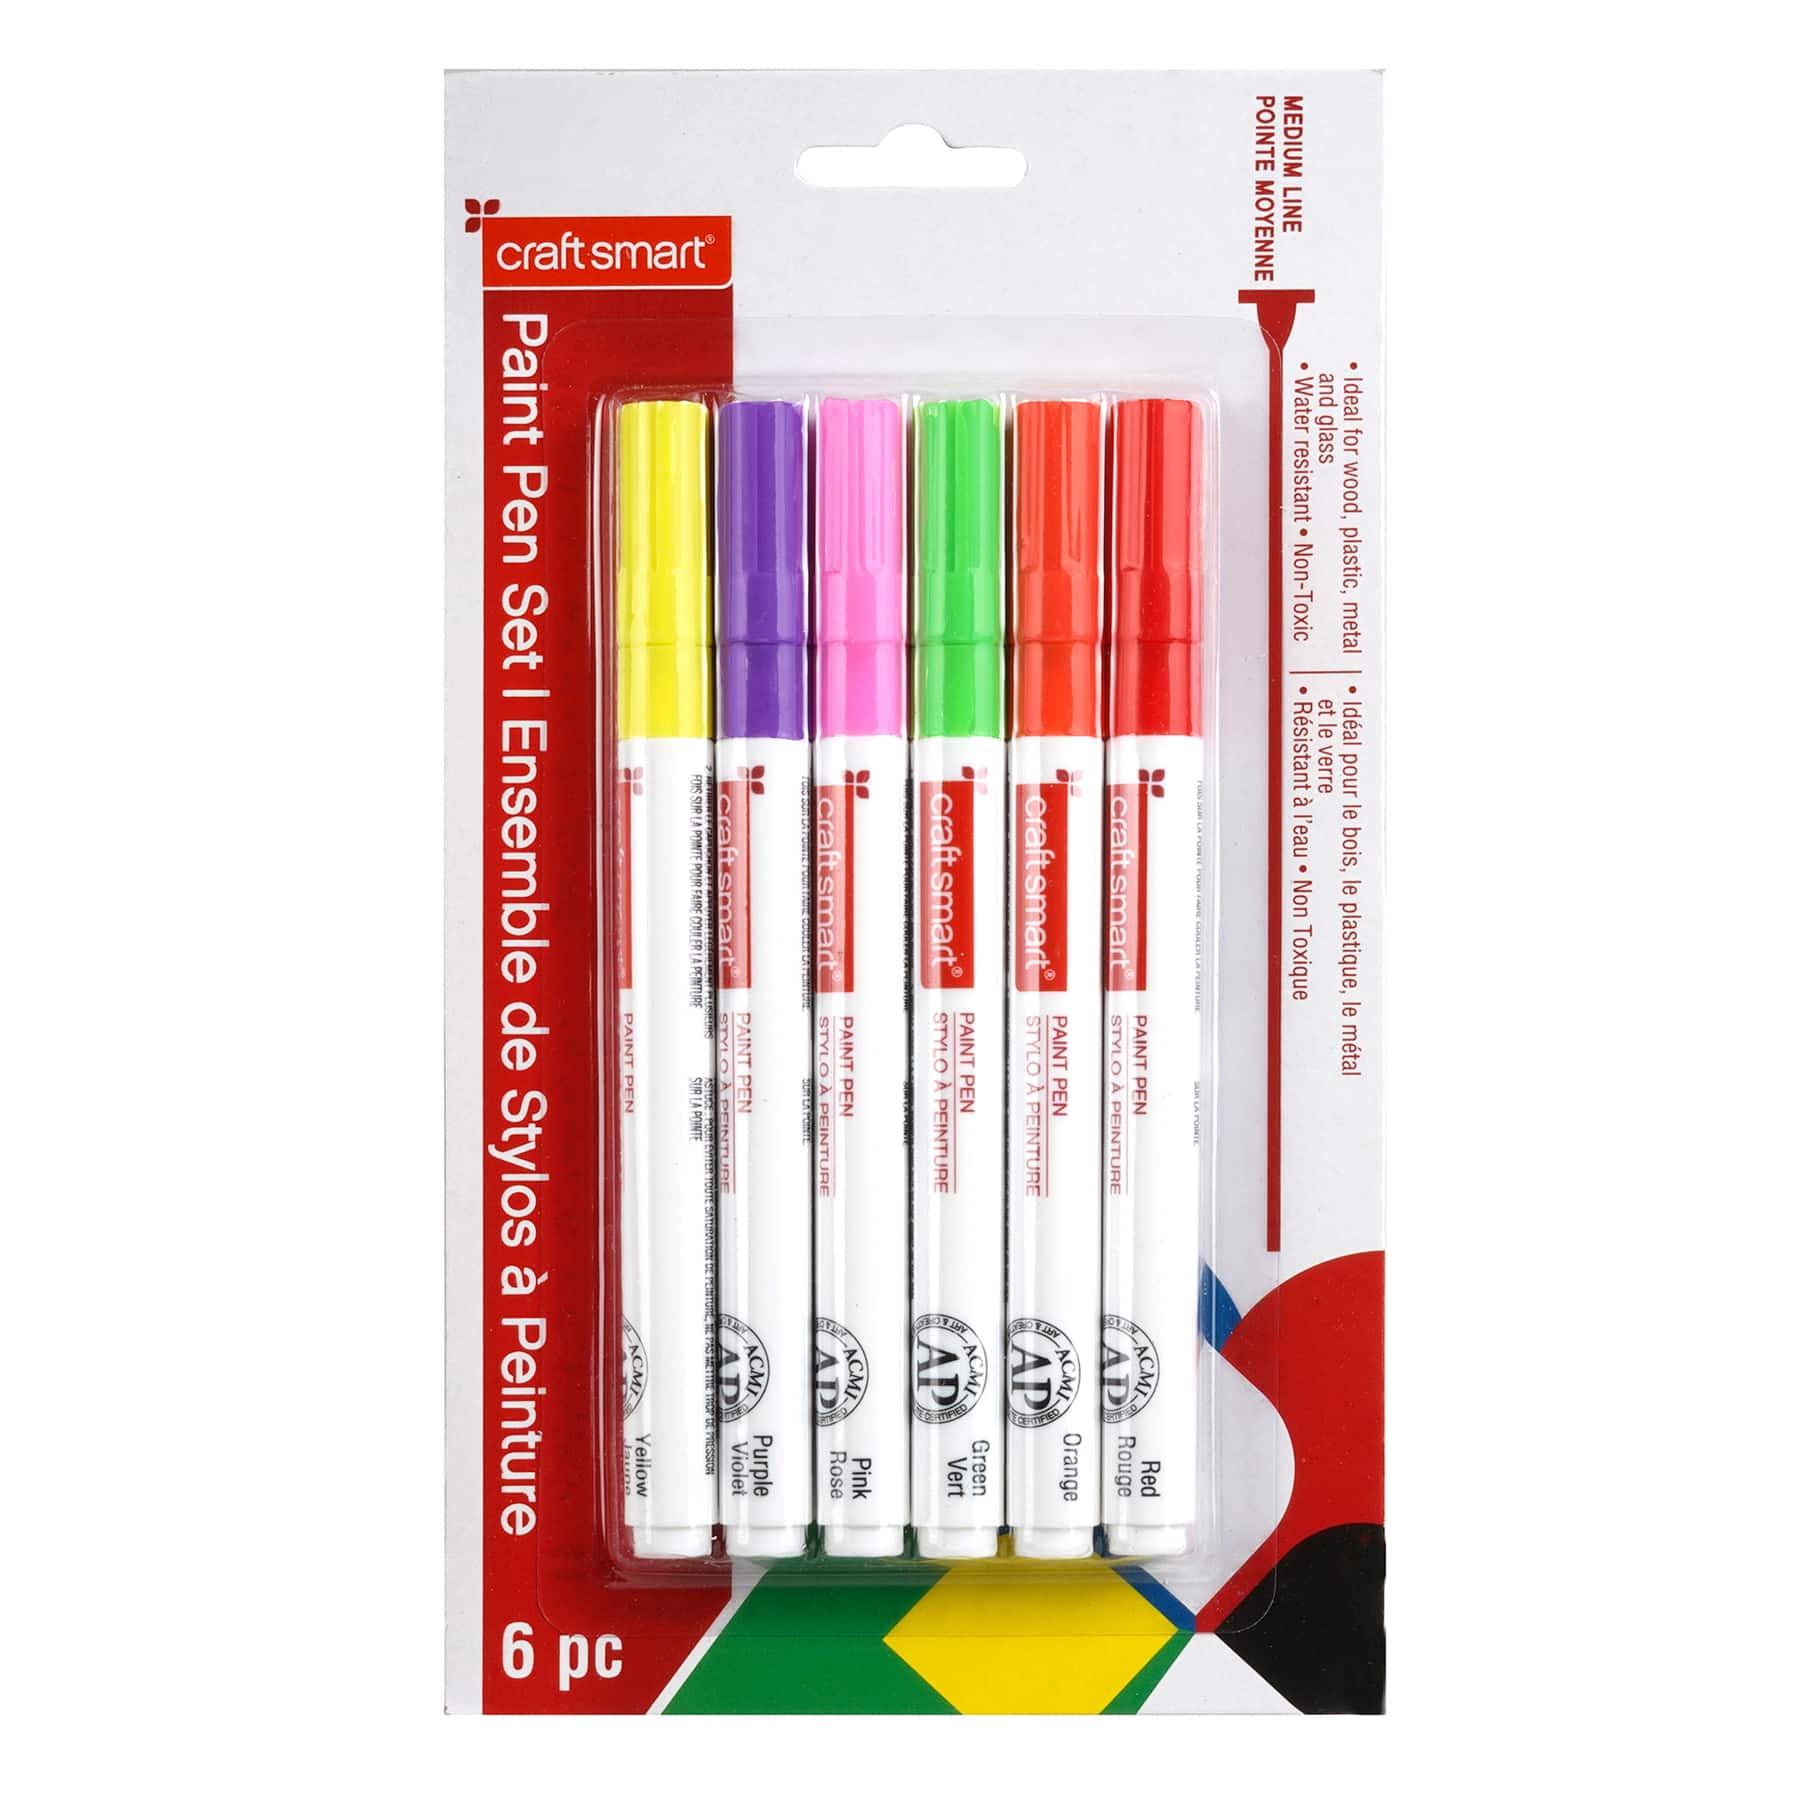 12 Packs: 6 Ct. (72 Total) Black & White Paint Pen Set by Craft Smart, Size: 7.48 x 0.51 x 4.25